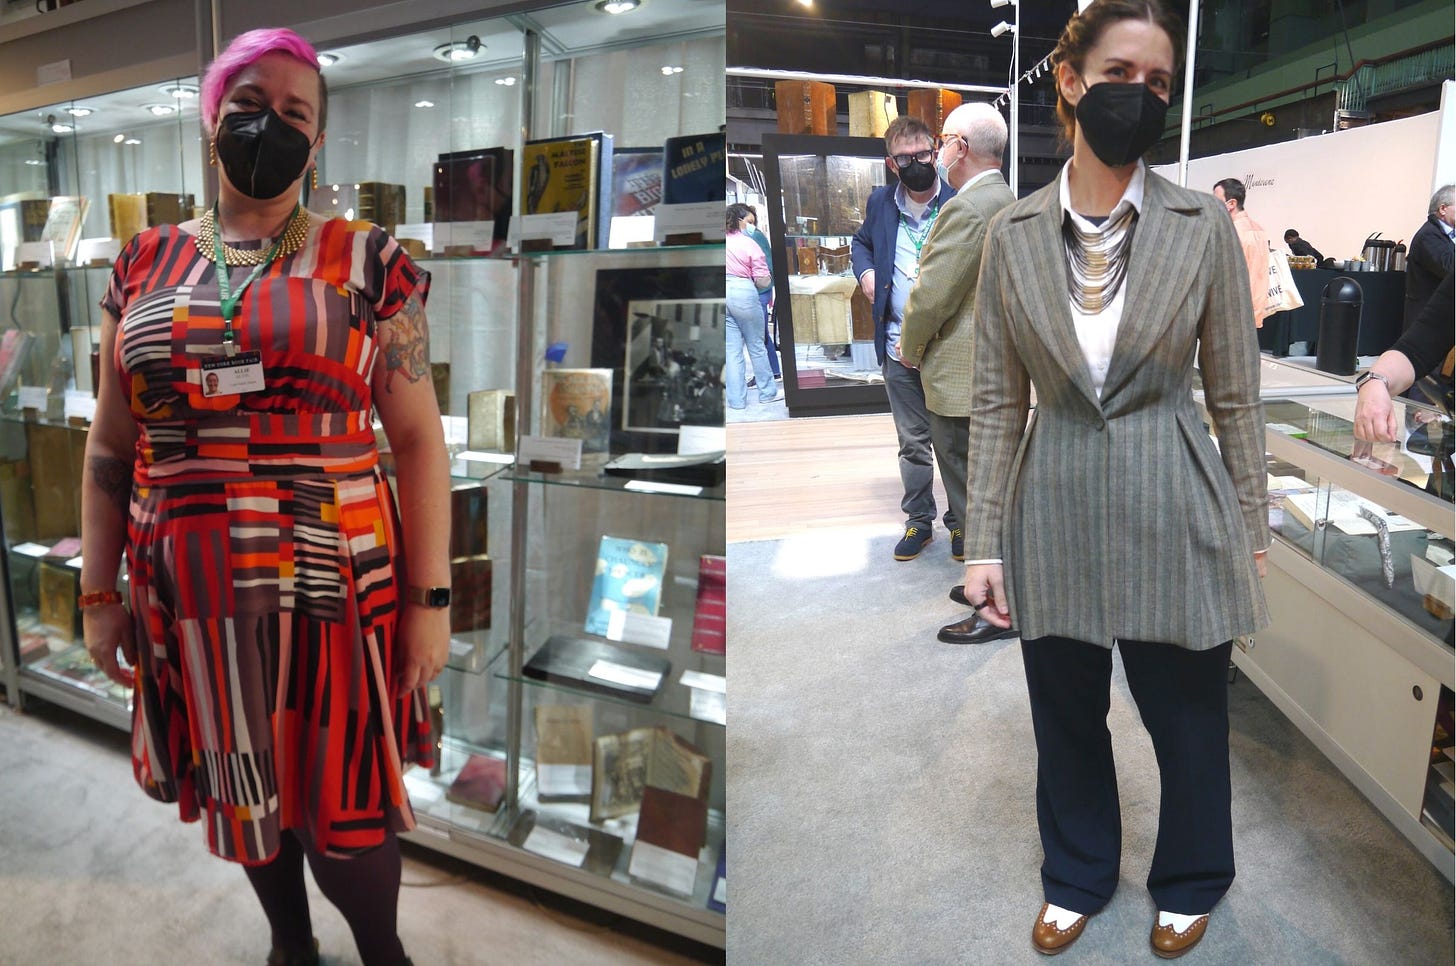 on Left: Allie stands in front of book display; she has bright pink hair, a red patchwork dress. Right: Rebecca Romney stands in grey jacket and black pants and two toned oxfords